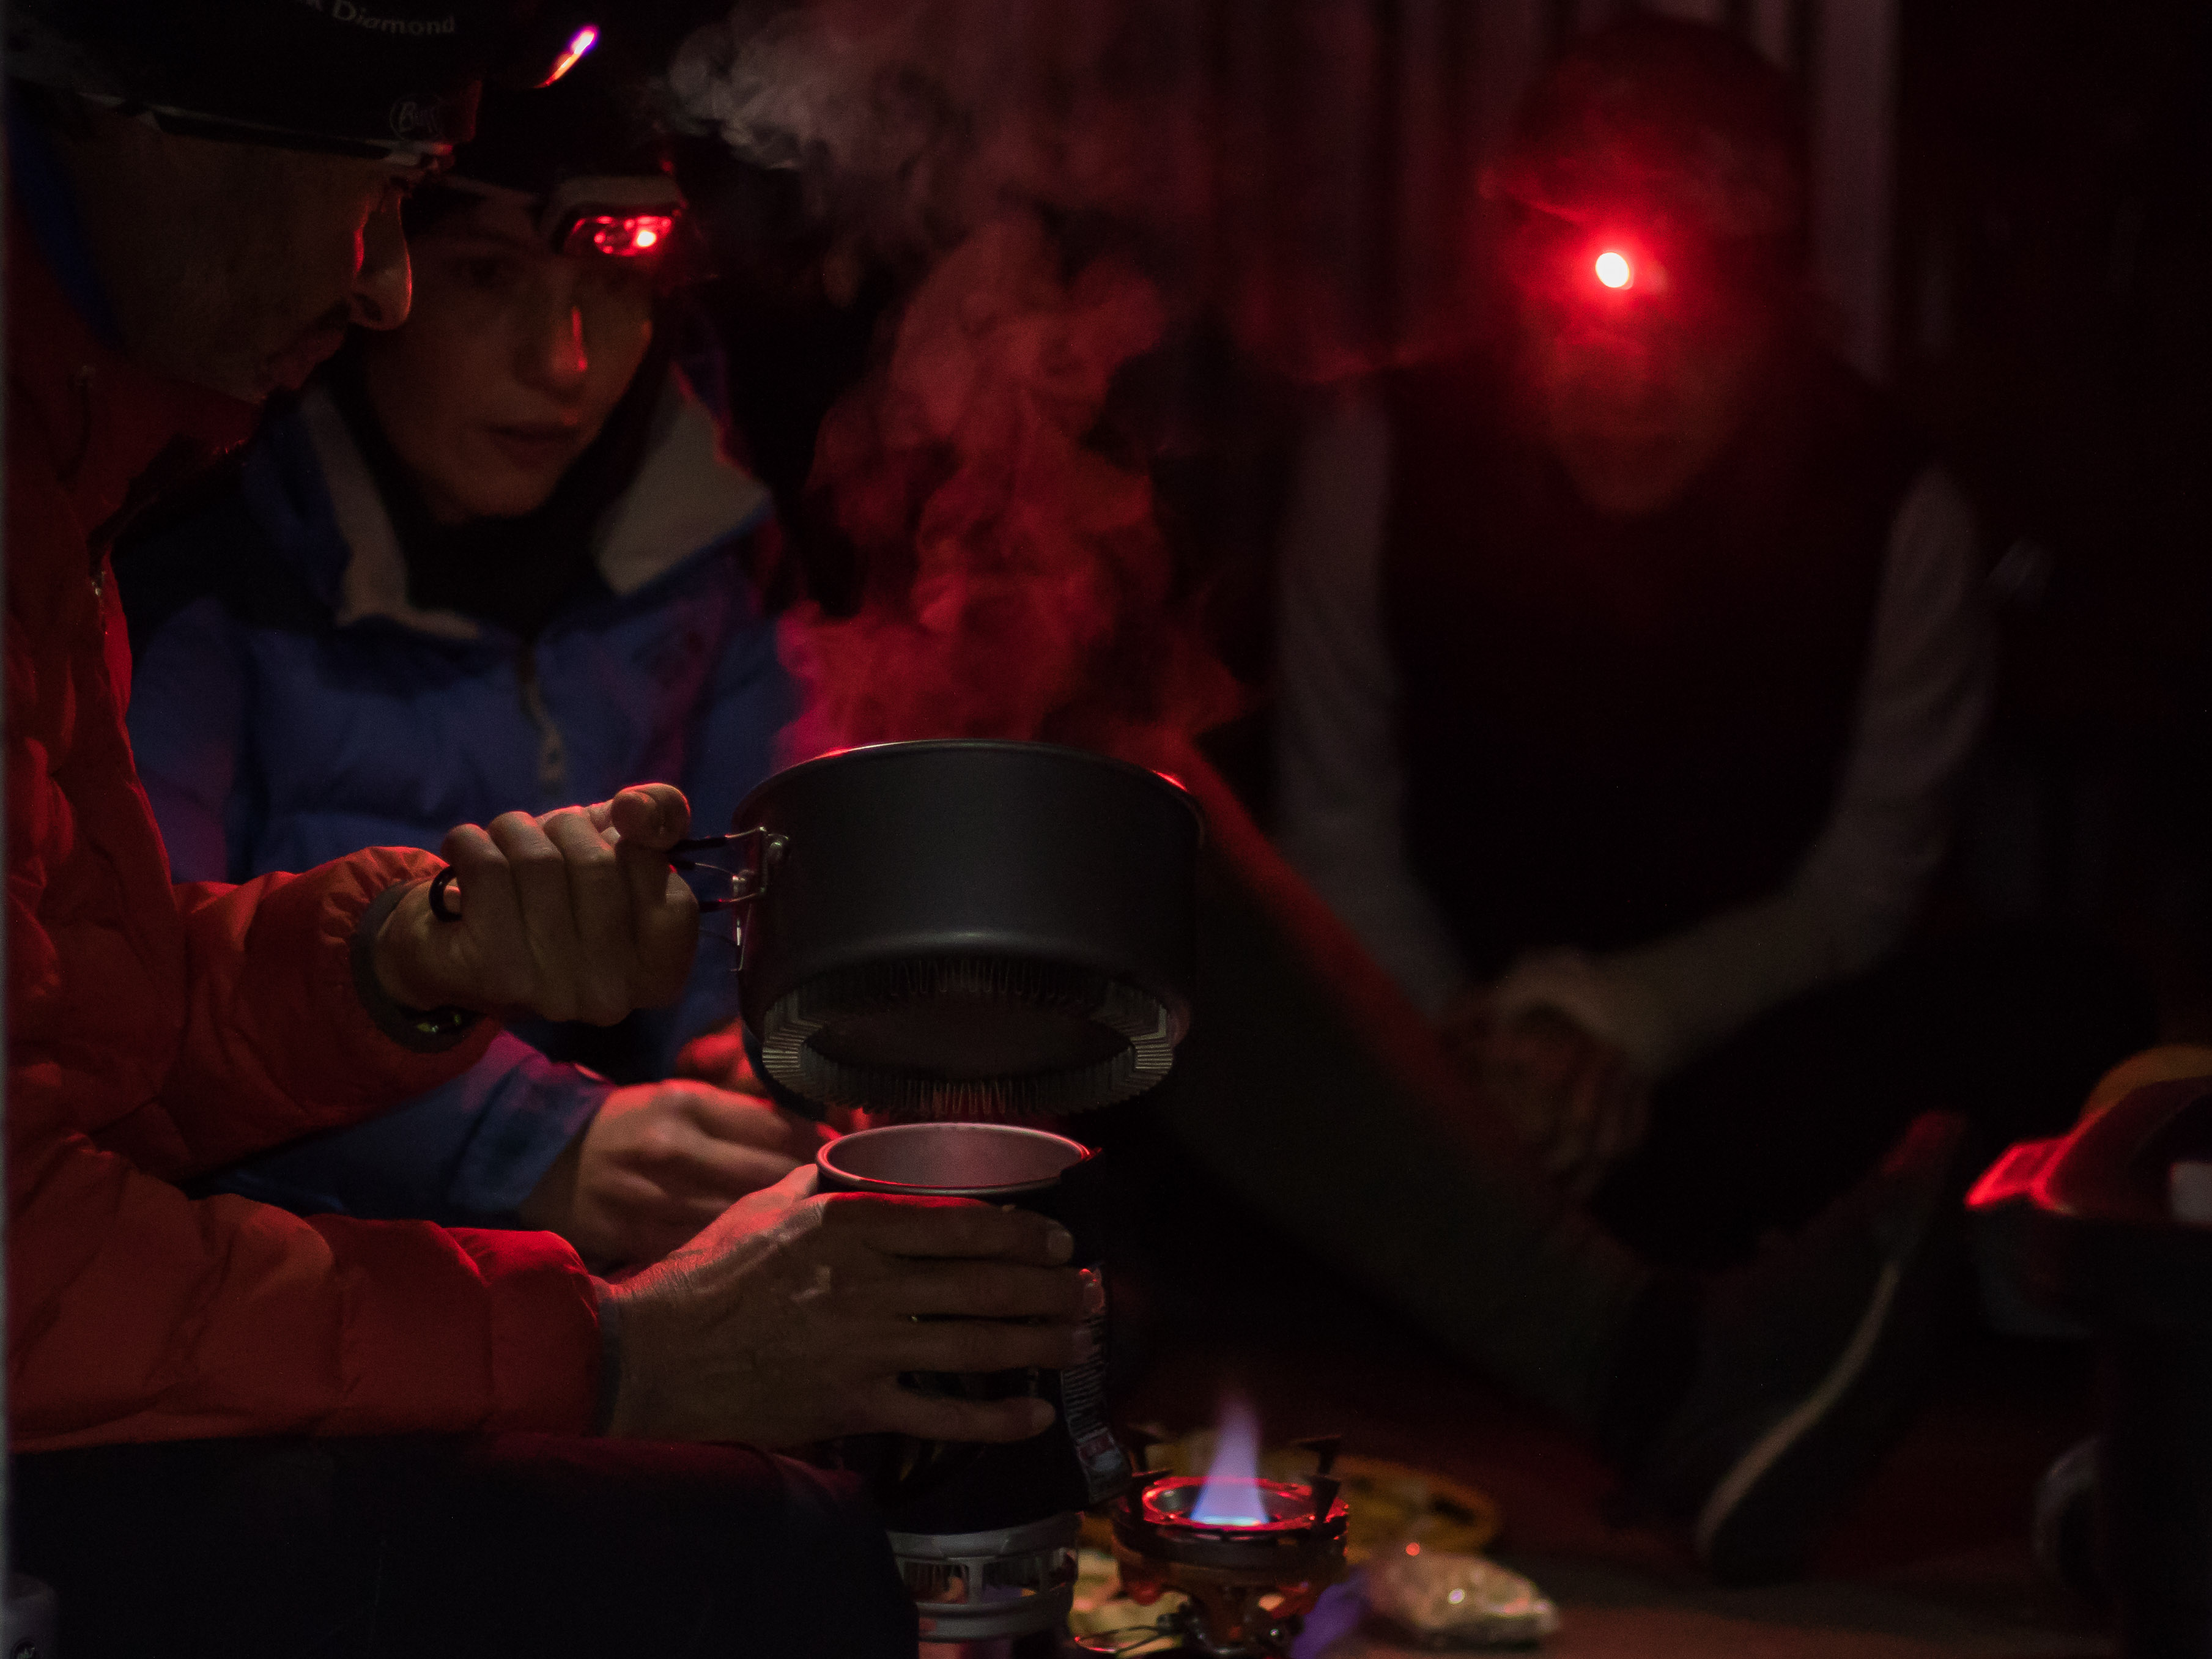 campers cooking on a Jetboil stove